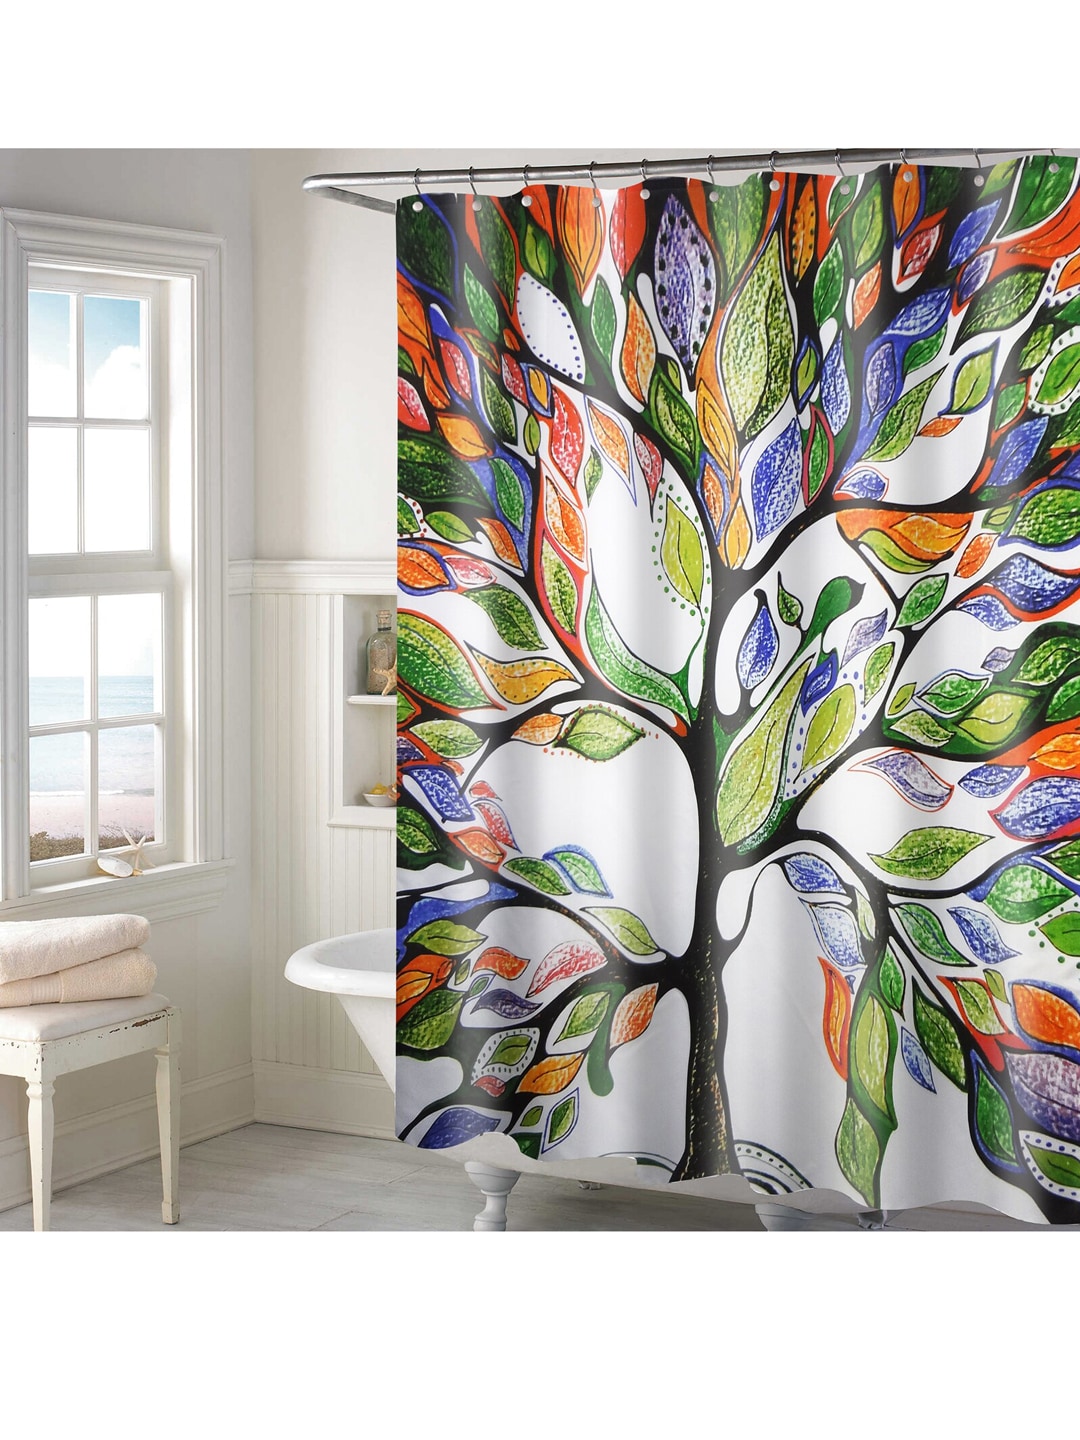 Lushomes White & Black Digital Printed Shower Curtain with 12 Eyelet and 12 Hook Price in India